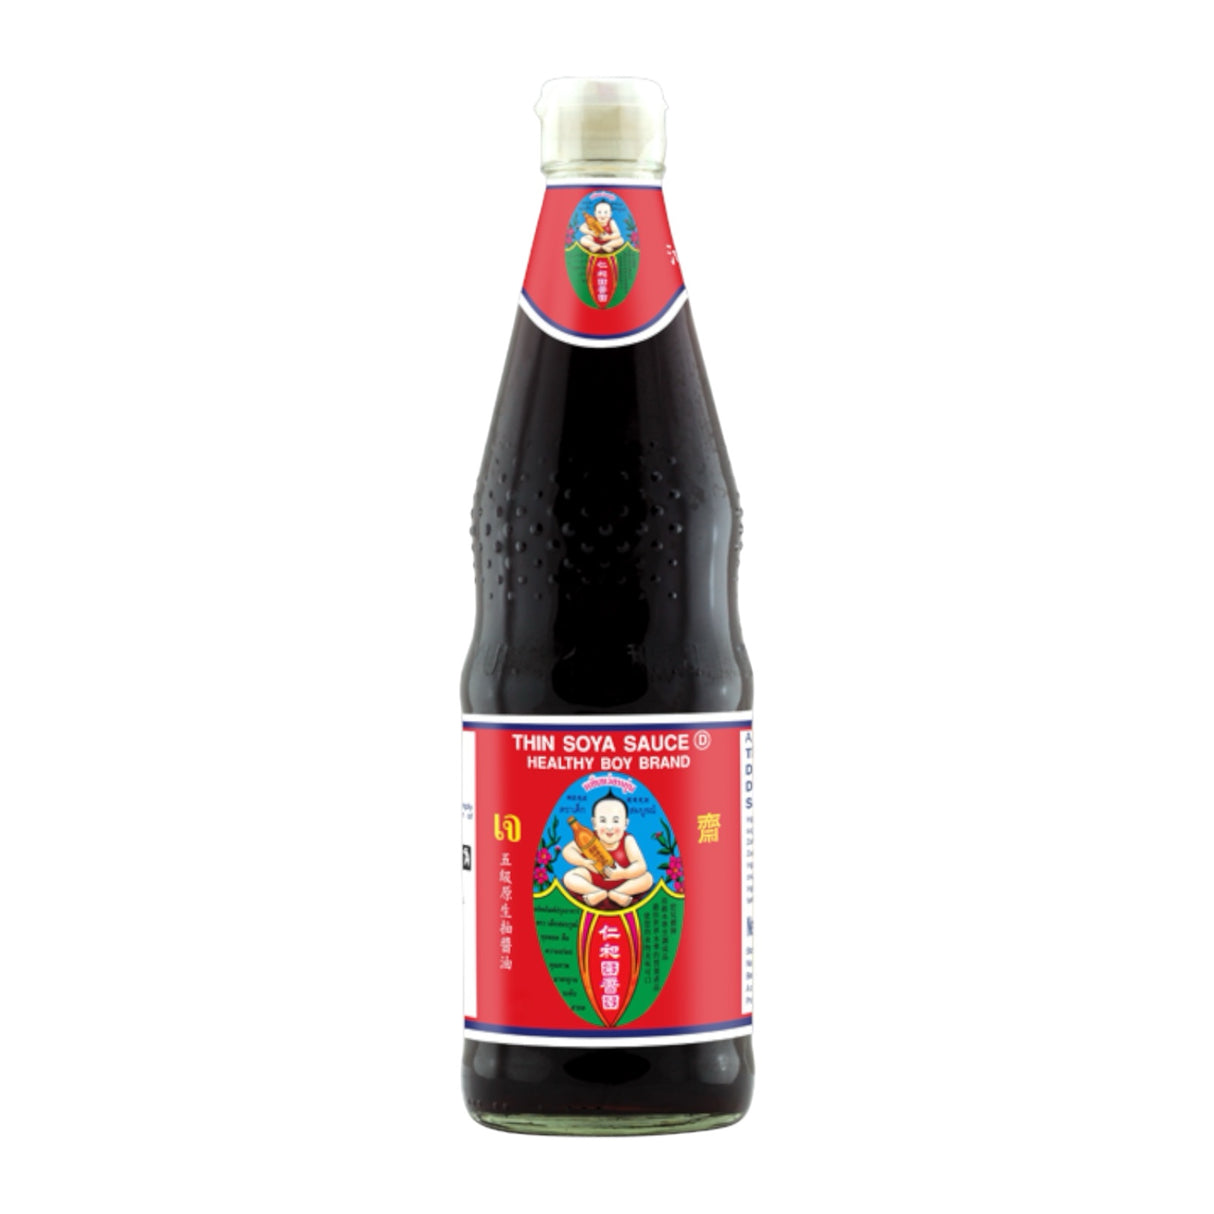 Healthy Boy Thin Soy Sauce (Red Label)